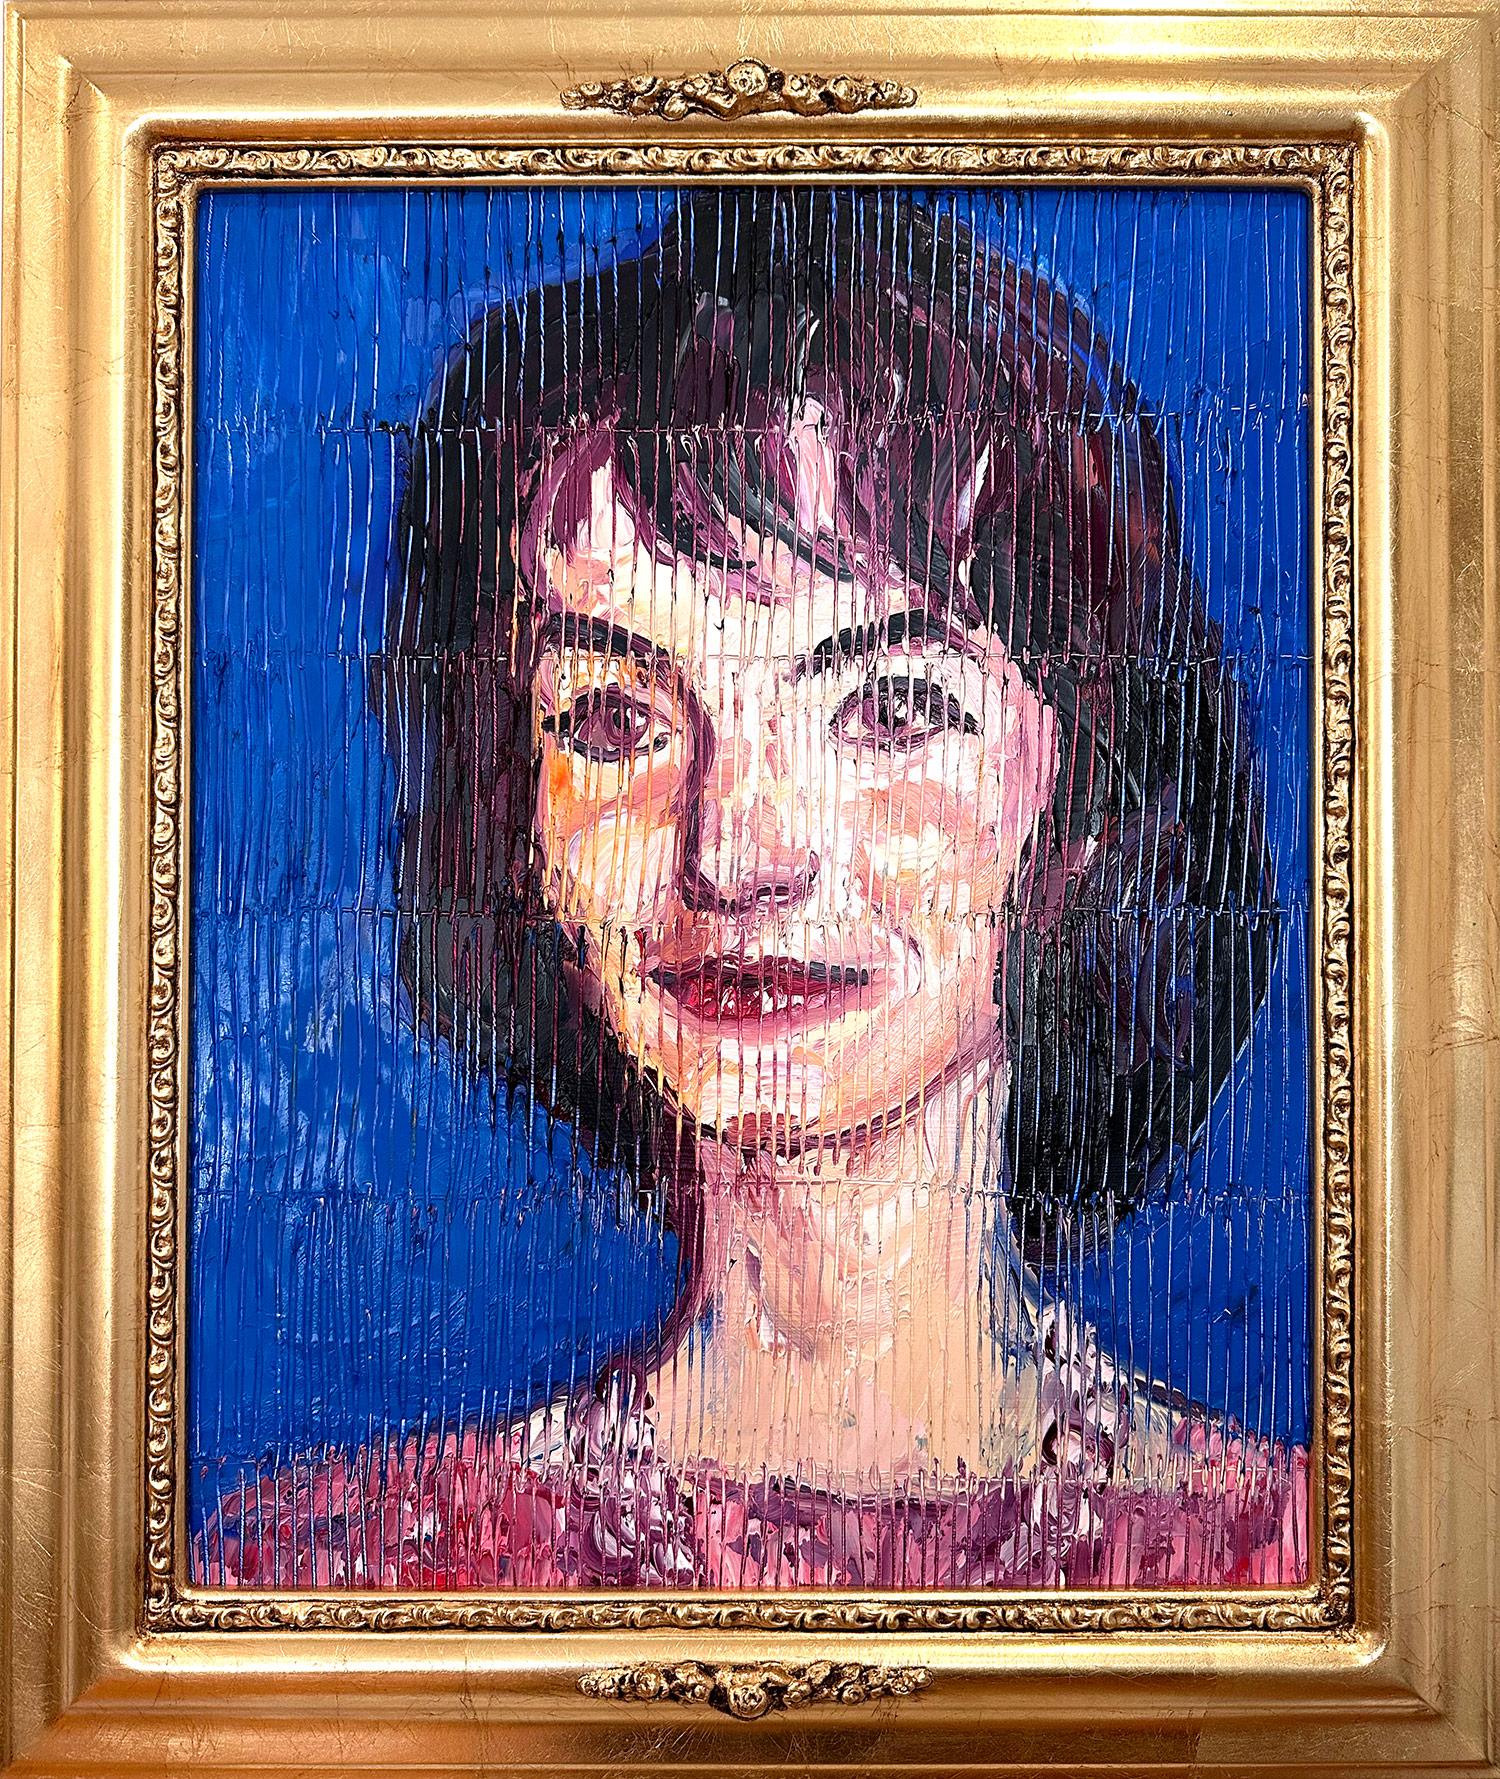 Hunt Slonem Figurative Painting - "Mrs. Kennedy" Neo-Expressionist Oil Painting in Blue Background on Wood Panel